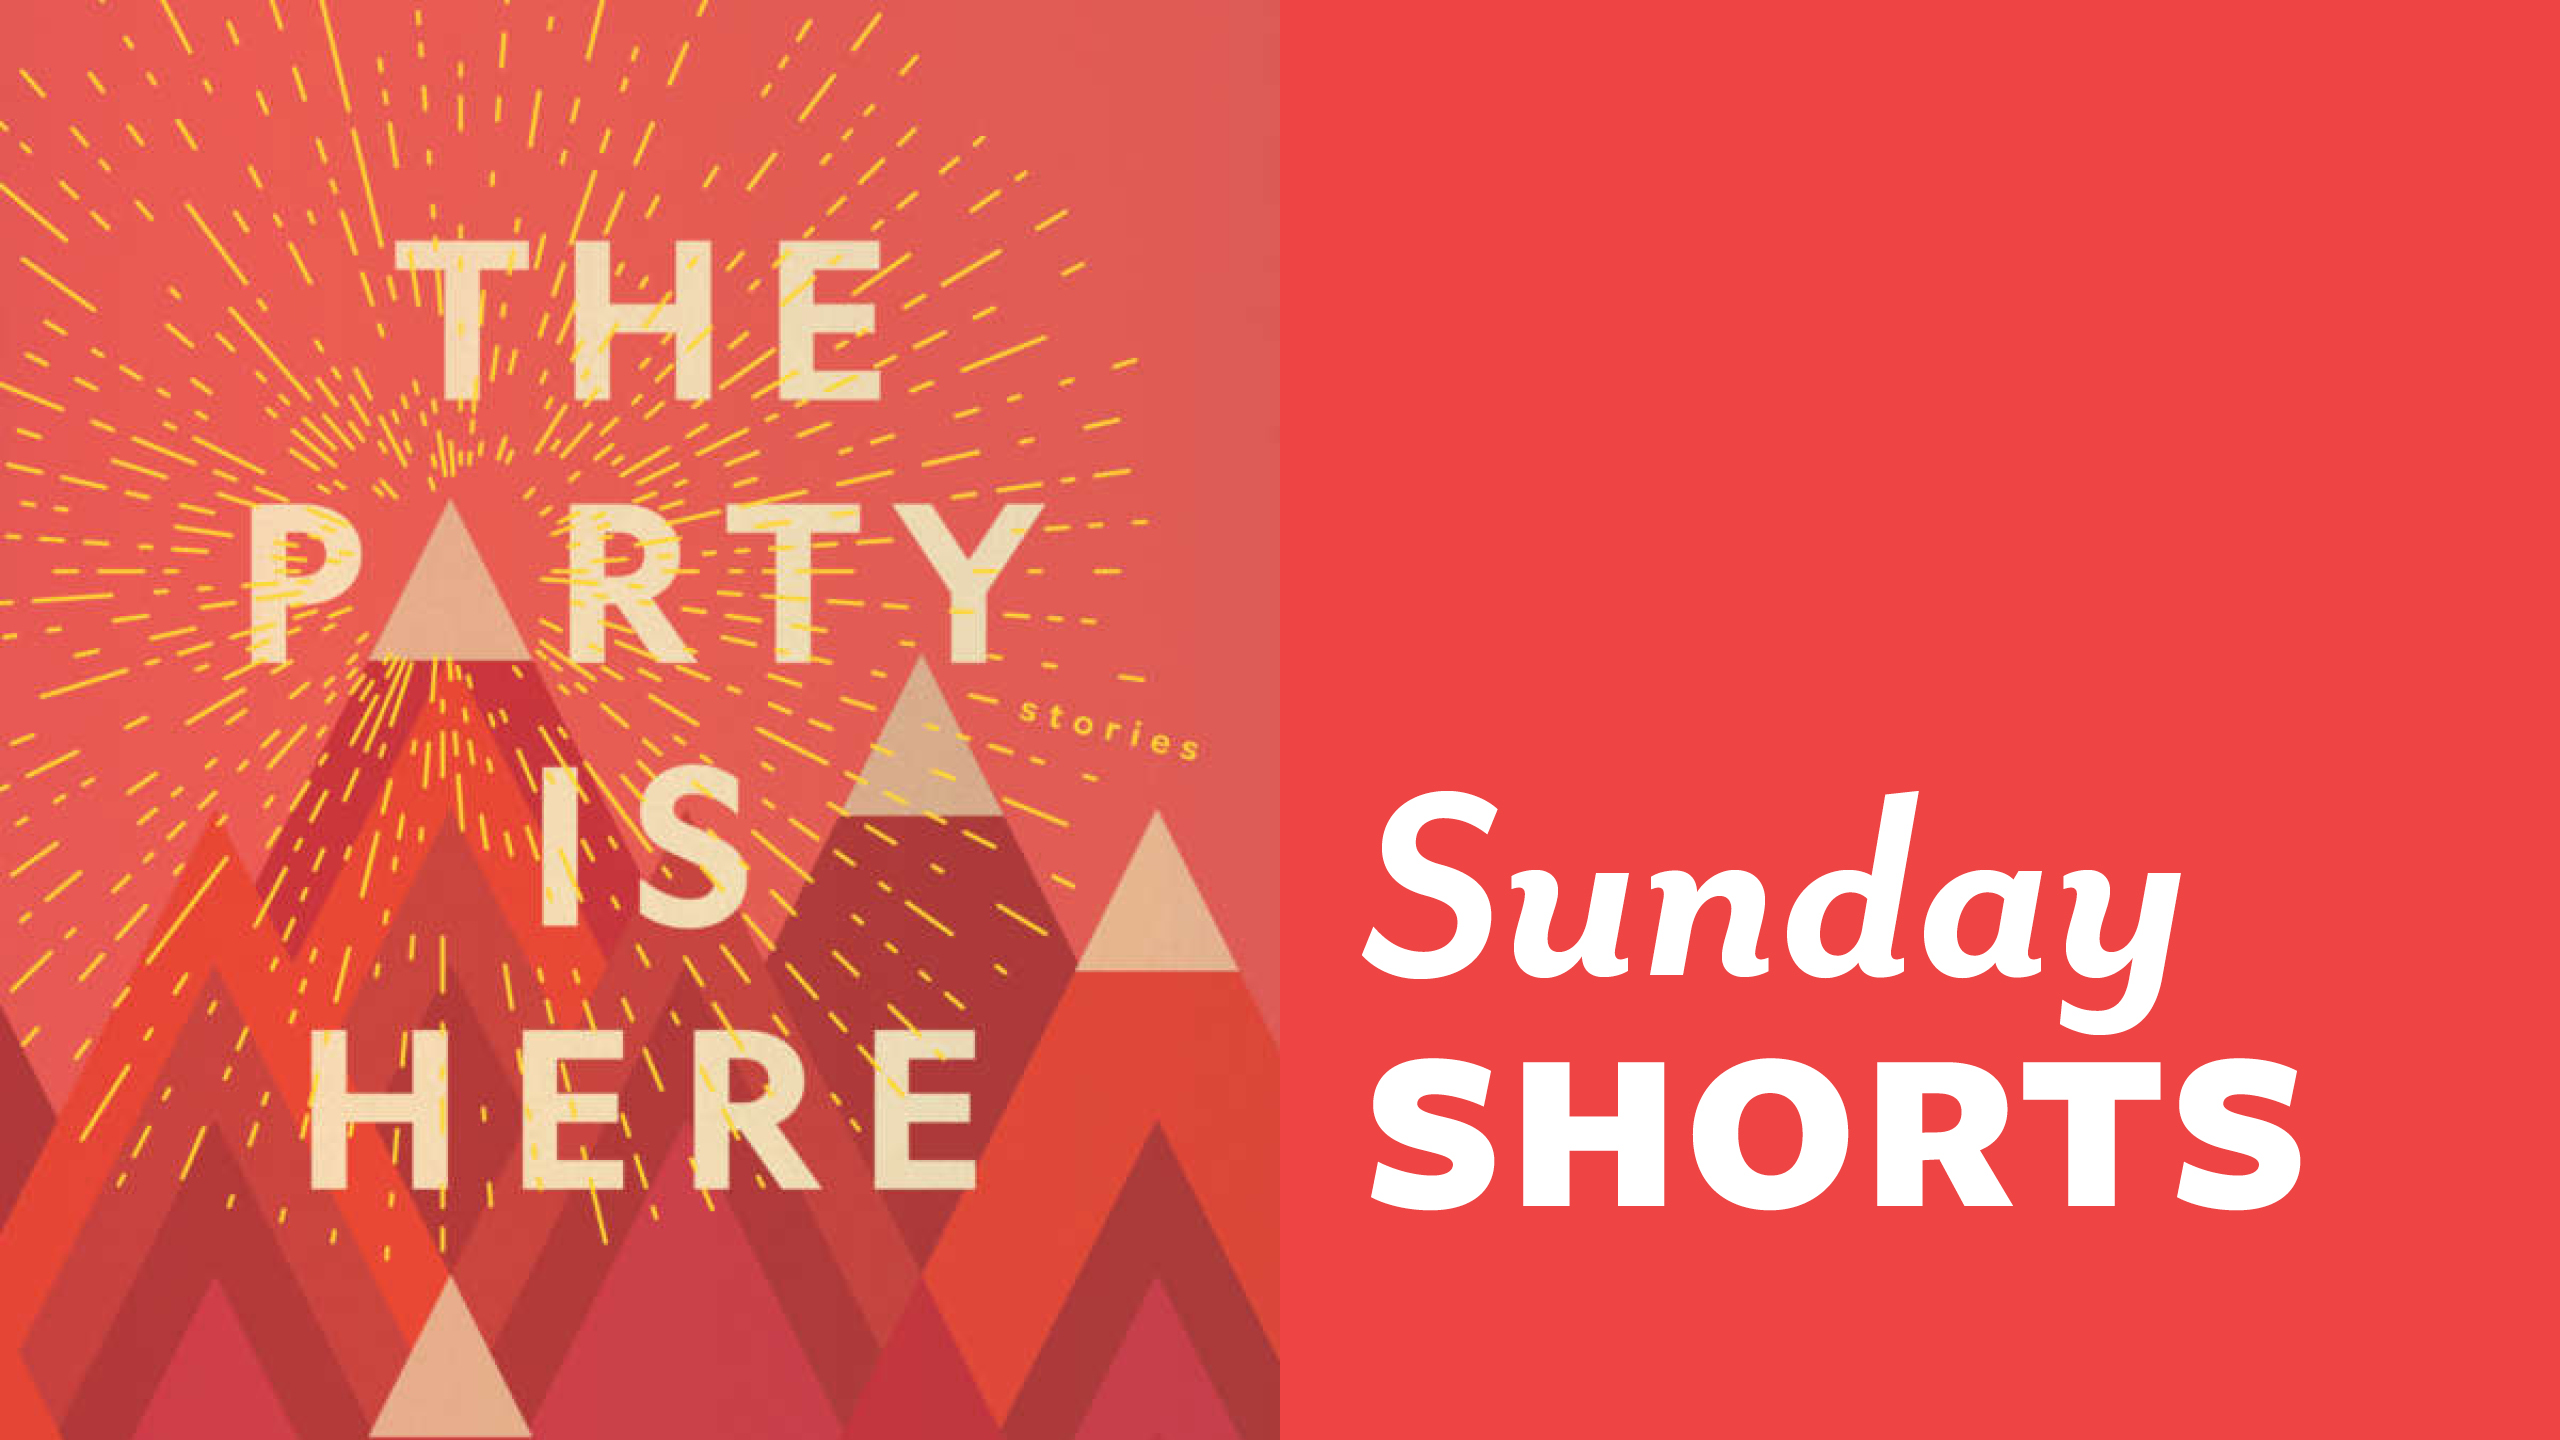 Sunday Shorts: Excerpt from The Party is Here by Georgina Beaty